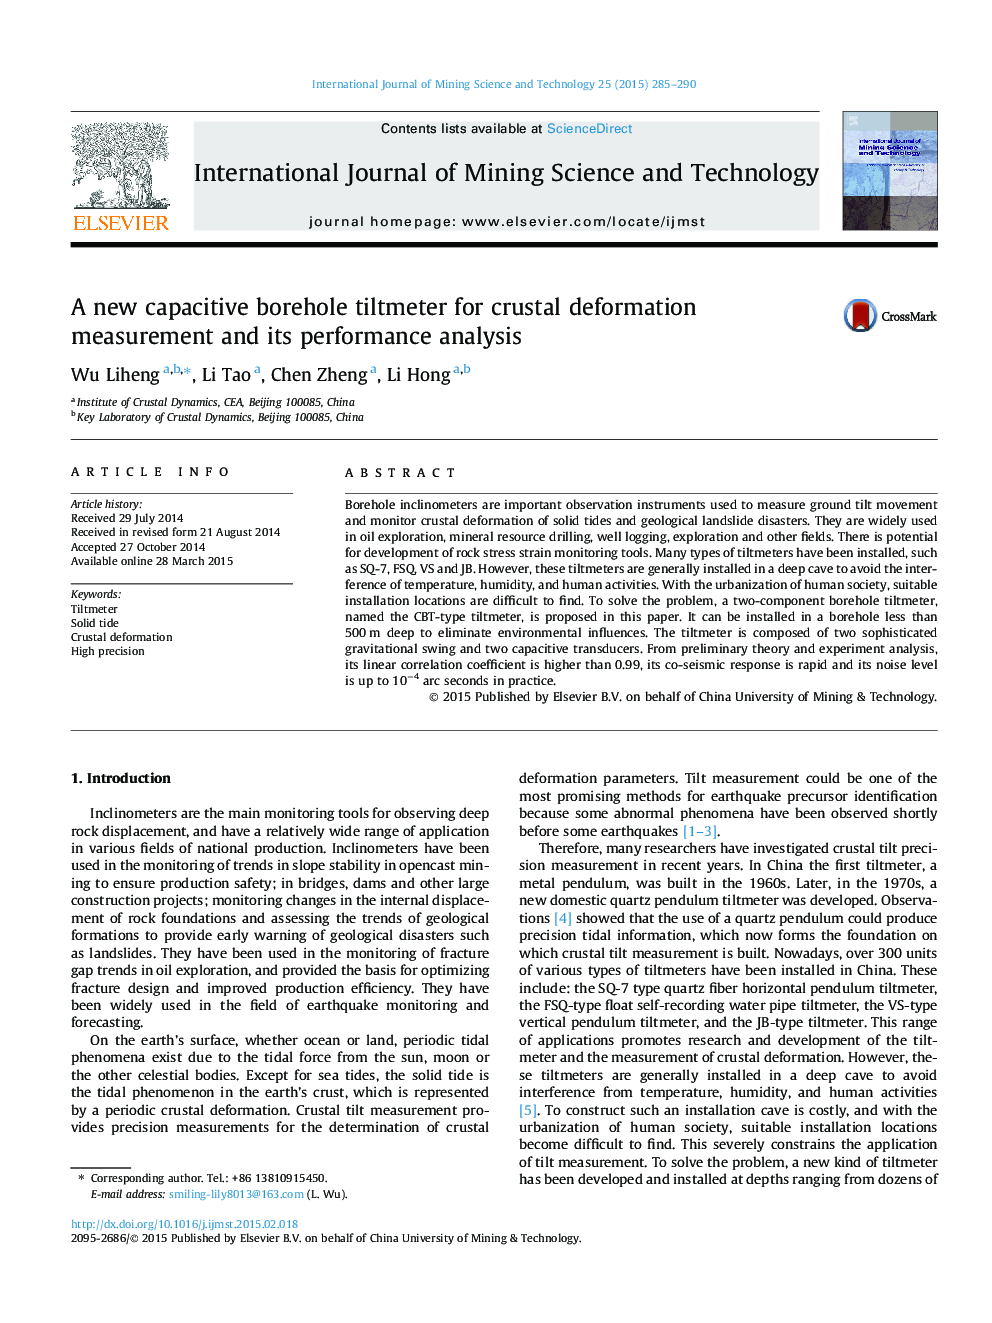 A new capacitive borehole tiltmeter for crustal deformation measurement and its performance analysis